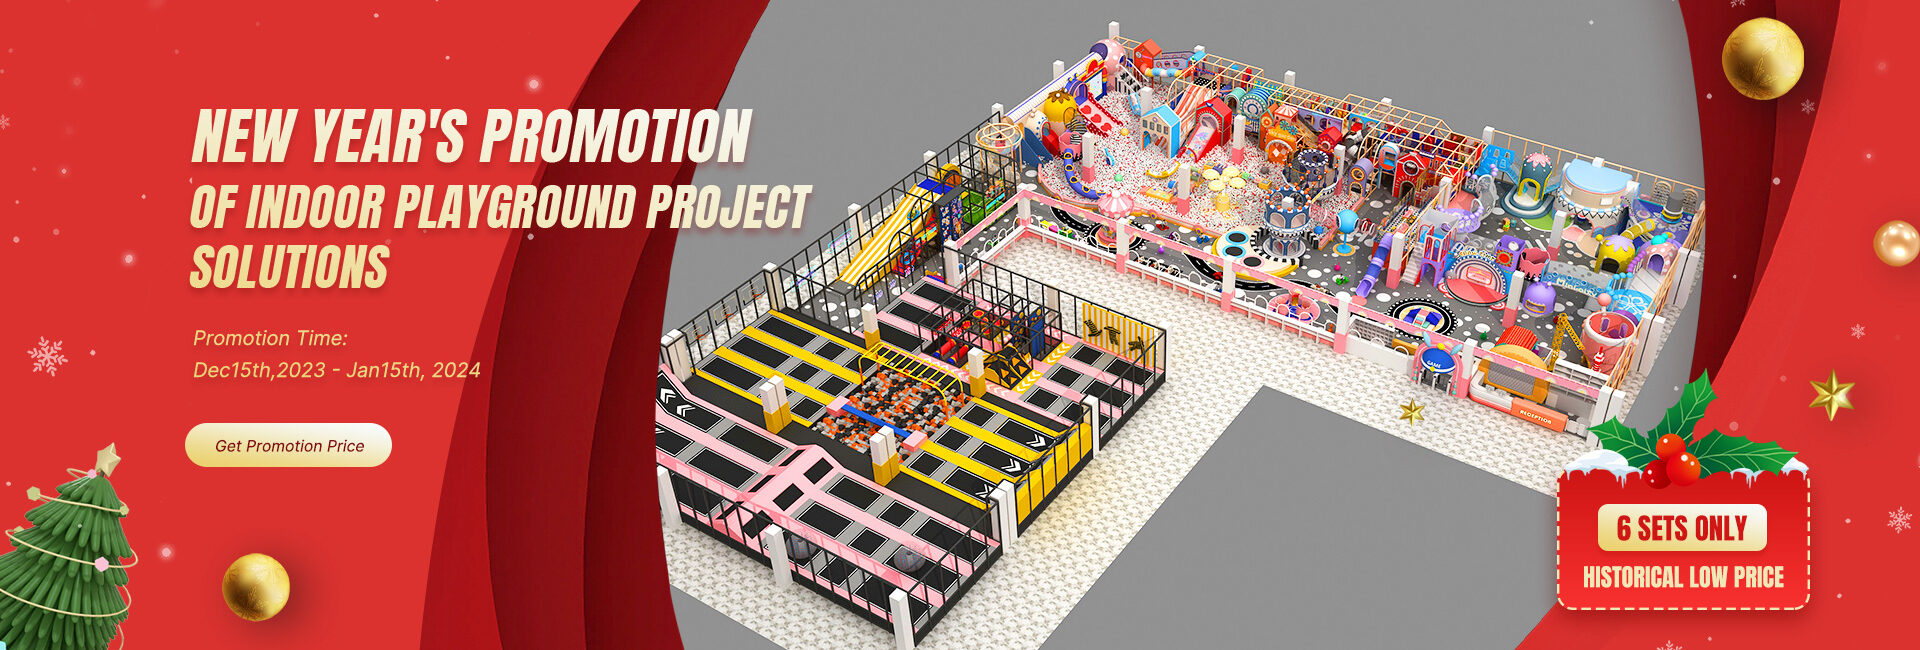 New year's promotion of indoor playground